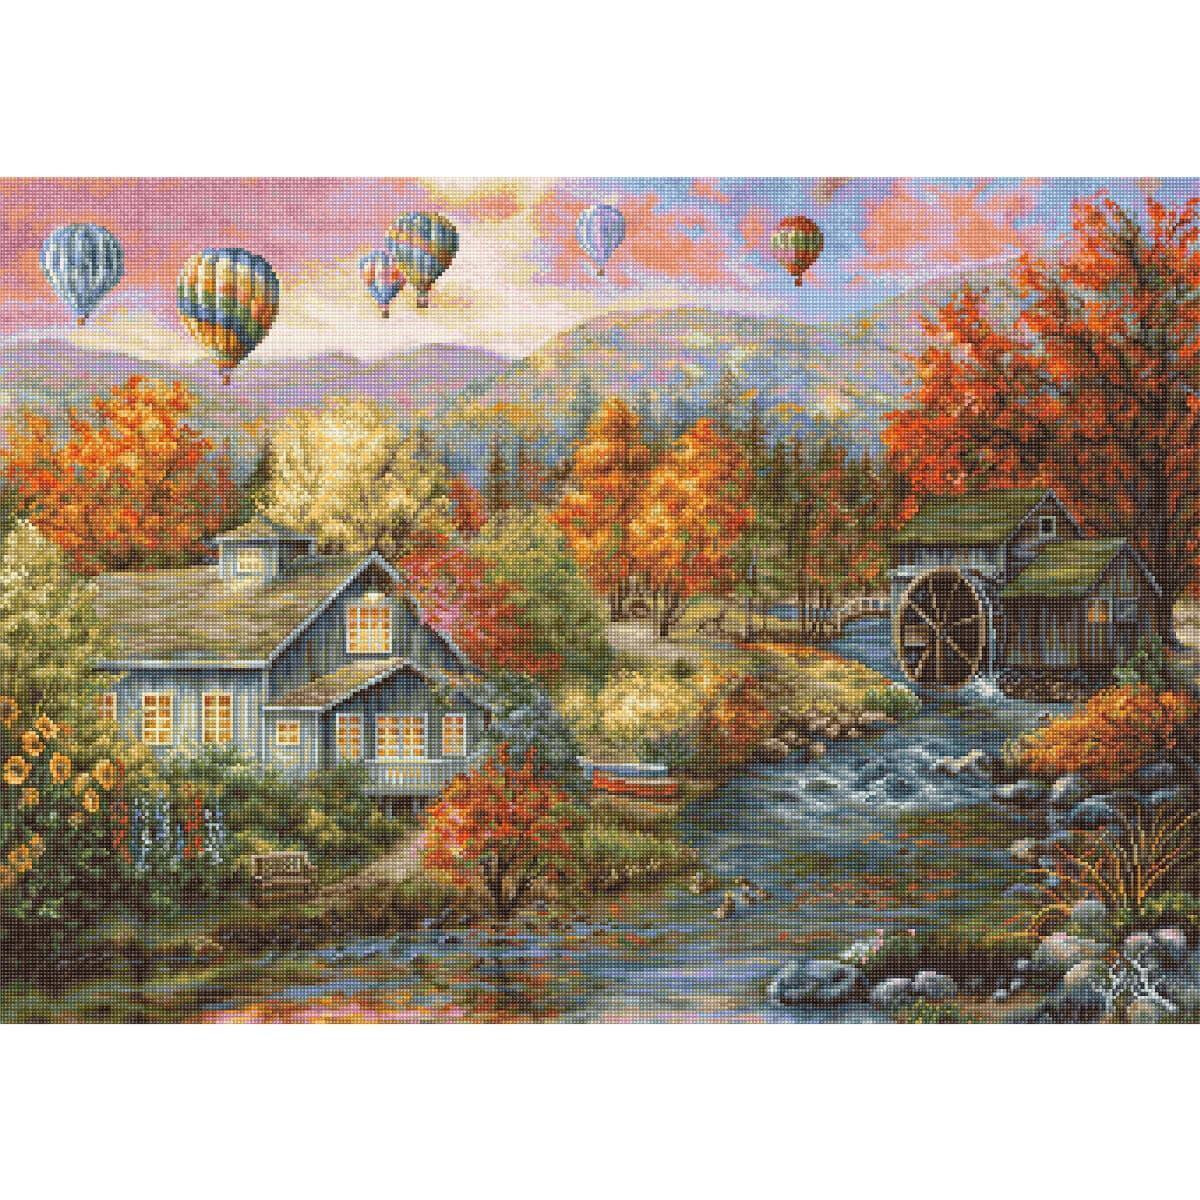 A colorful landscape shows hot air balloons floating...